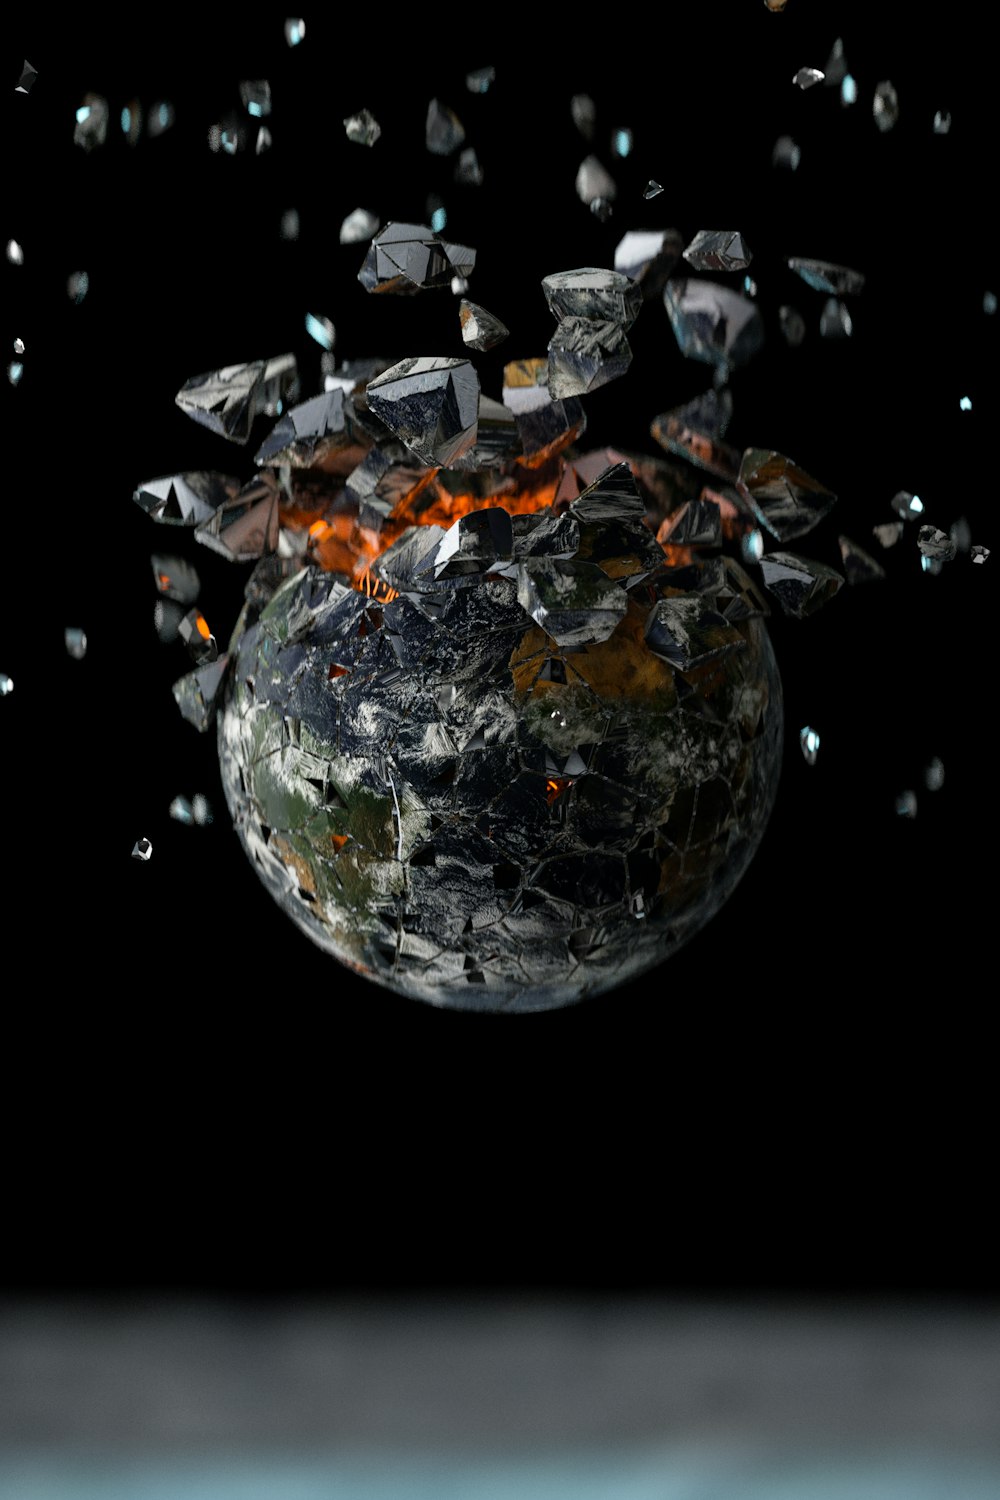 a picture of a planet with a lot of debris around it